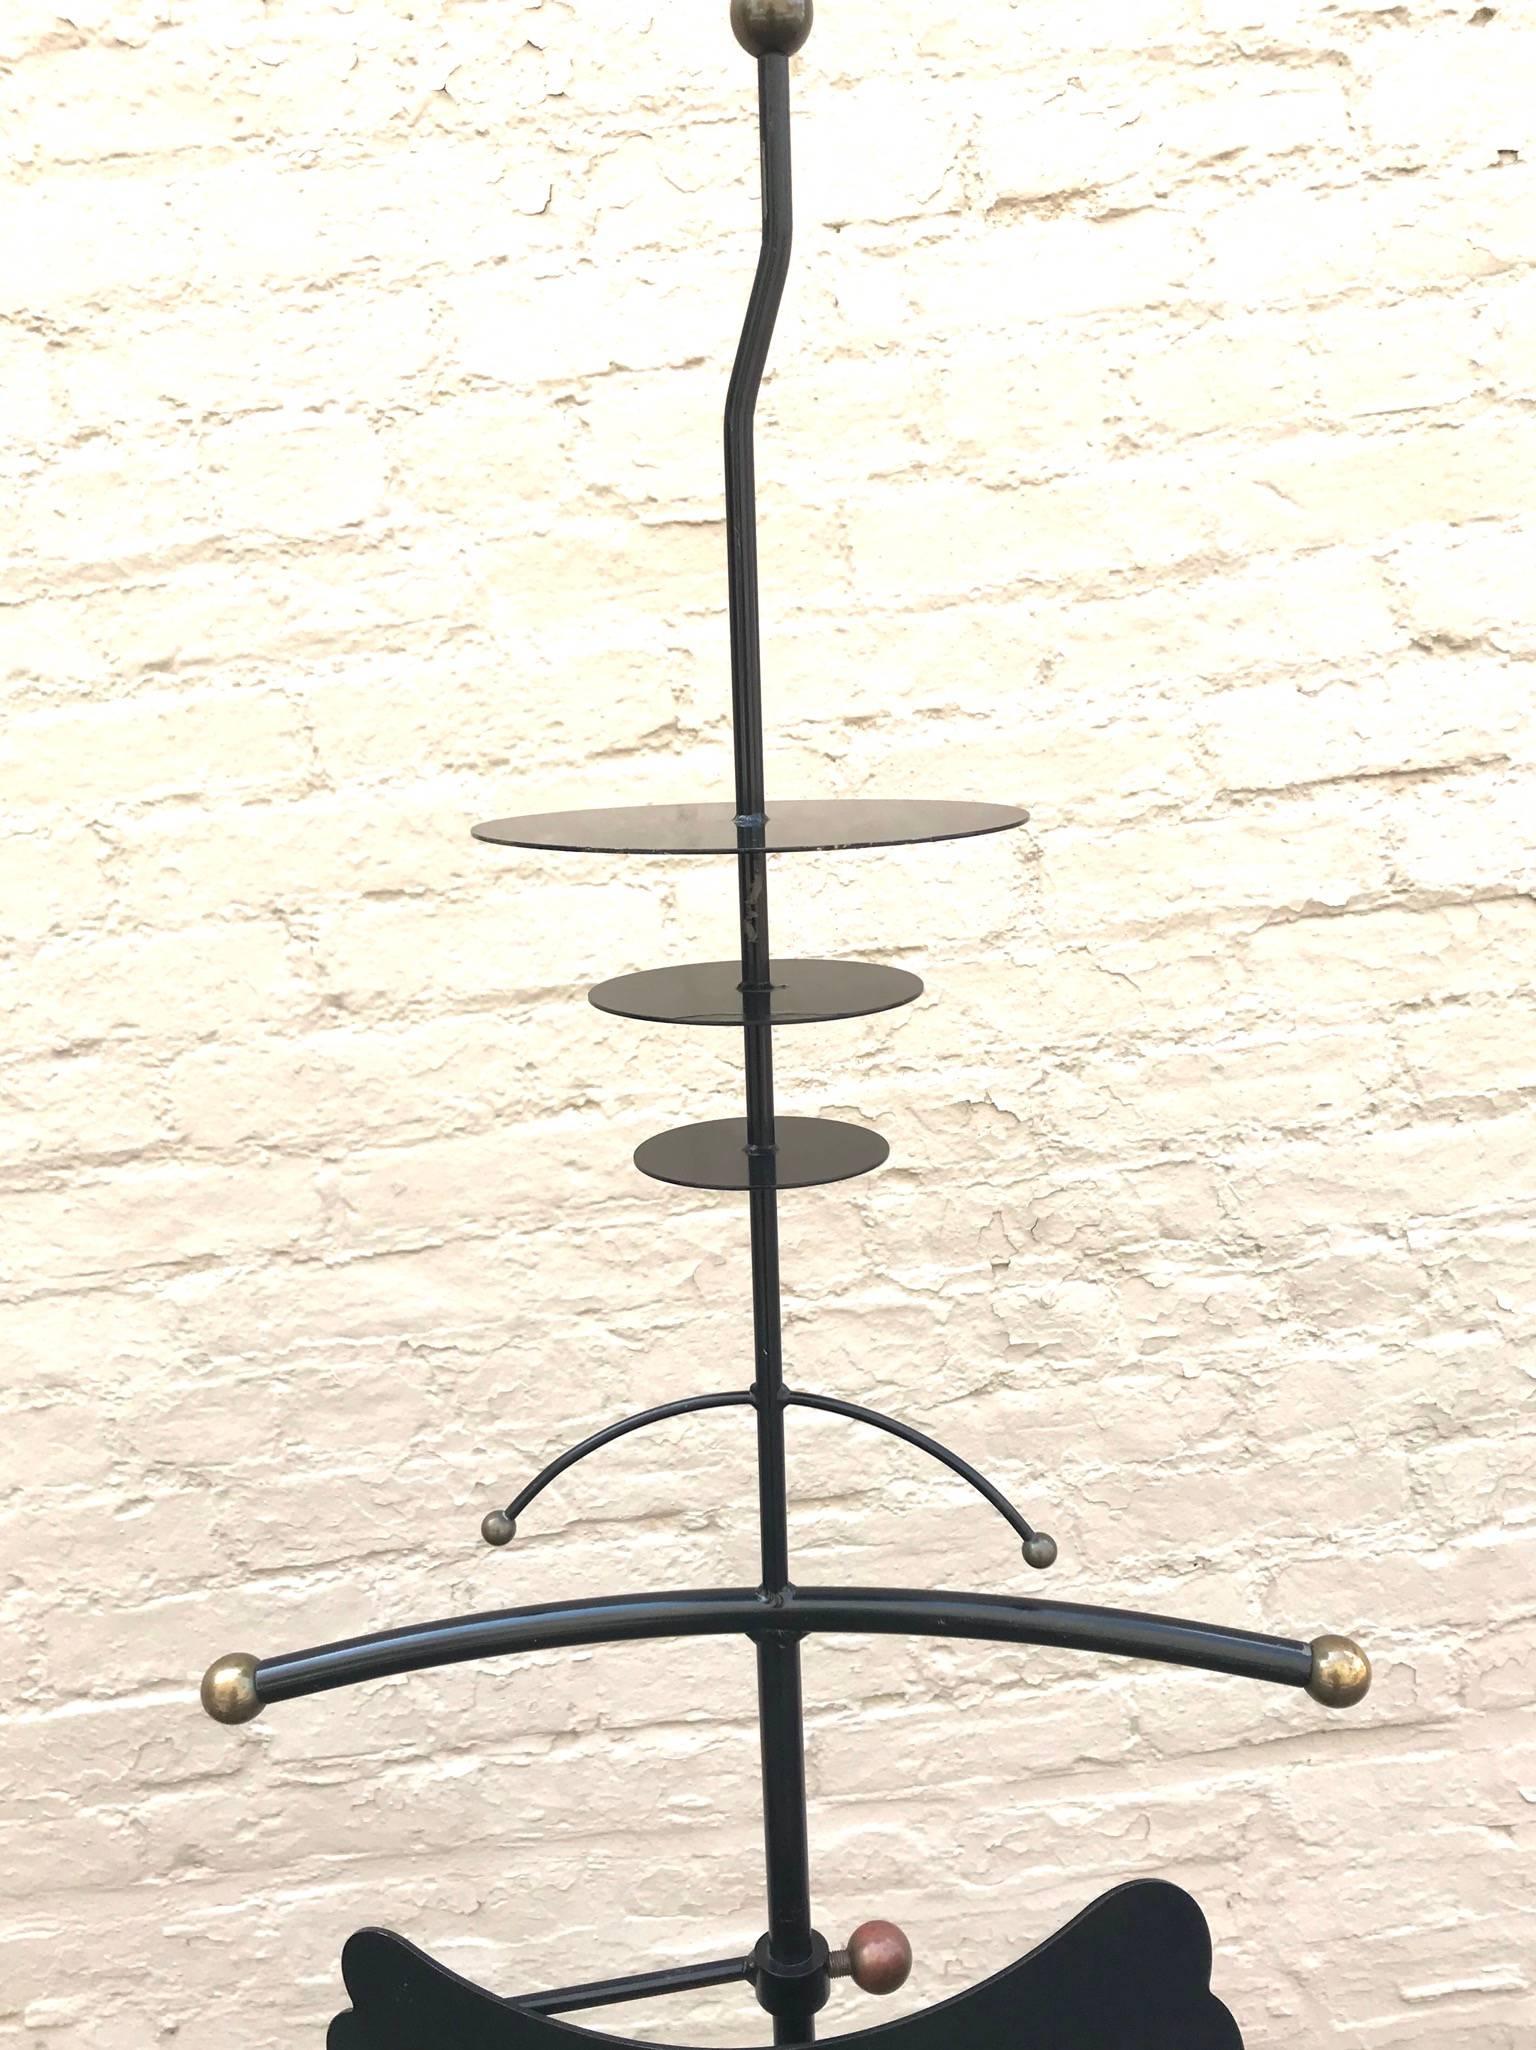 Tall 1980s Memphis era Italian telescoping valet stand in enameled wrought iron with brass ball finial detail.